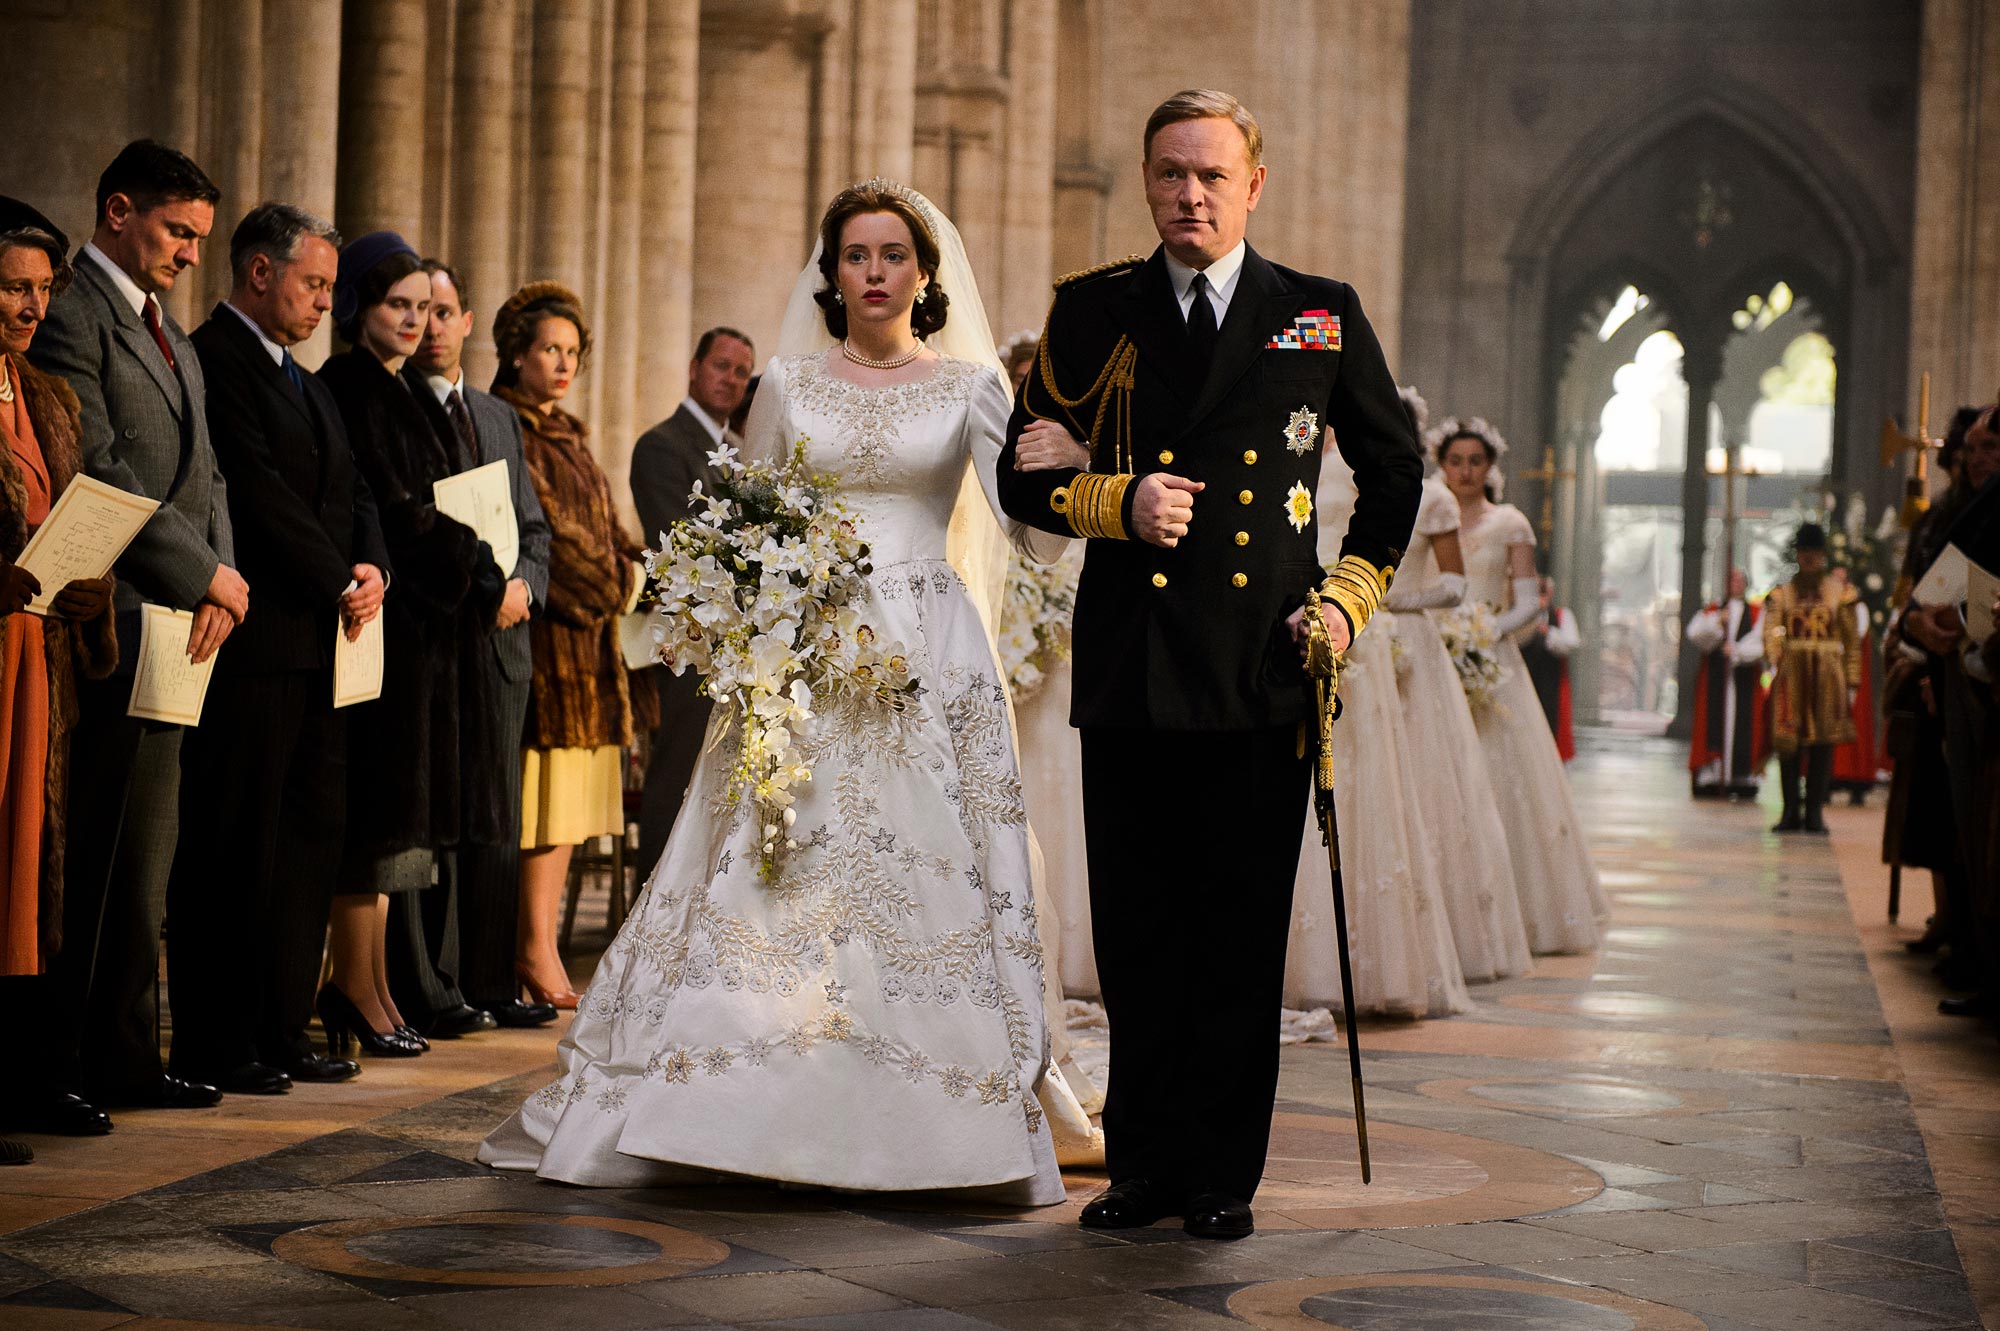 The Crown s Jared Harris Thinks Royal Family Would Like the Show for Humanizing Them 558